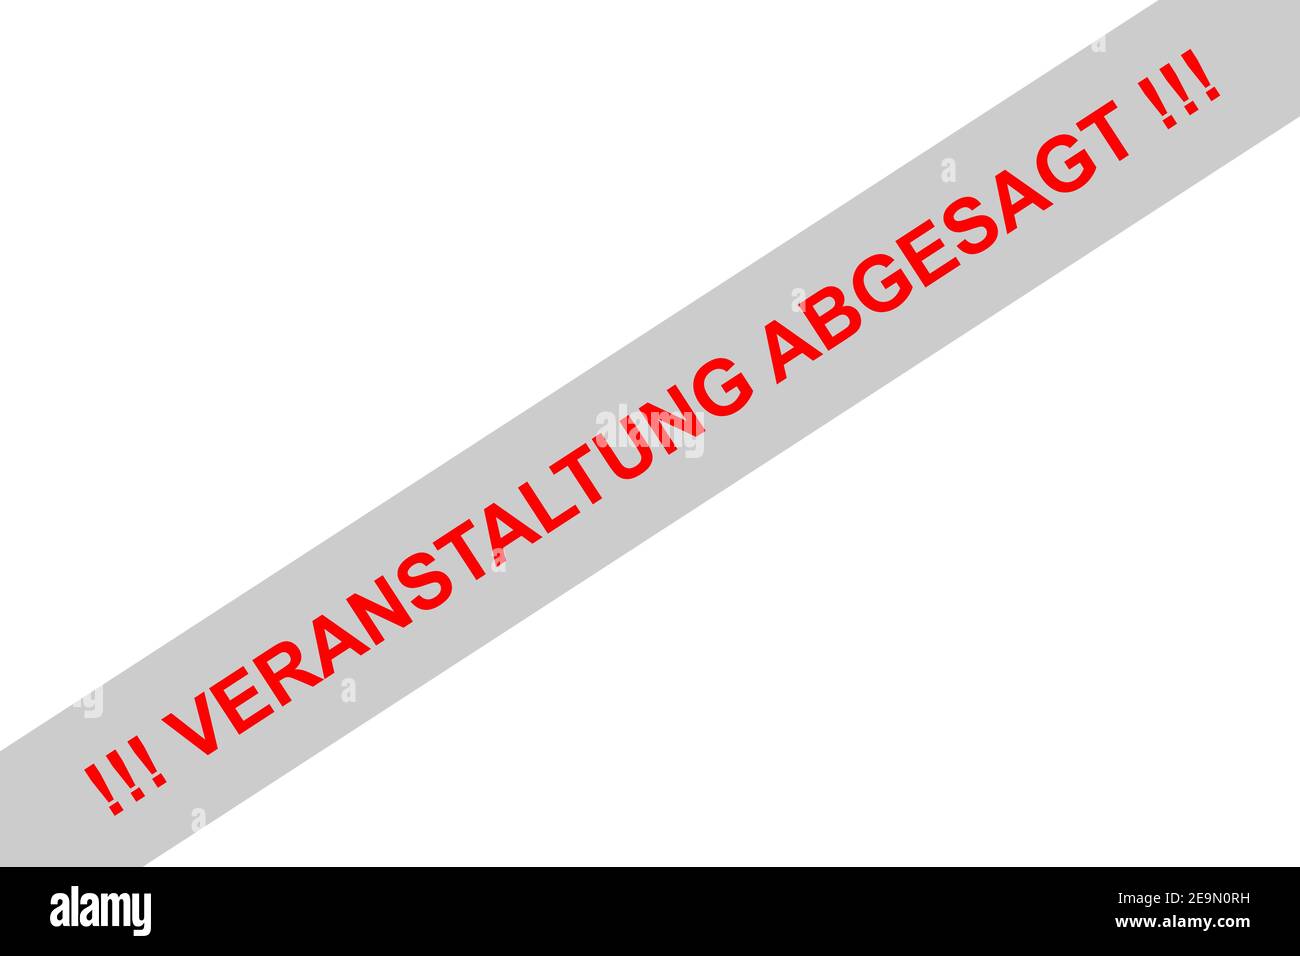 Red sign in german letters with the information (Veranstaltung) abgesagt (event canceled) Stock Photo